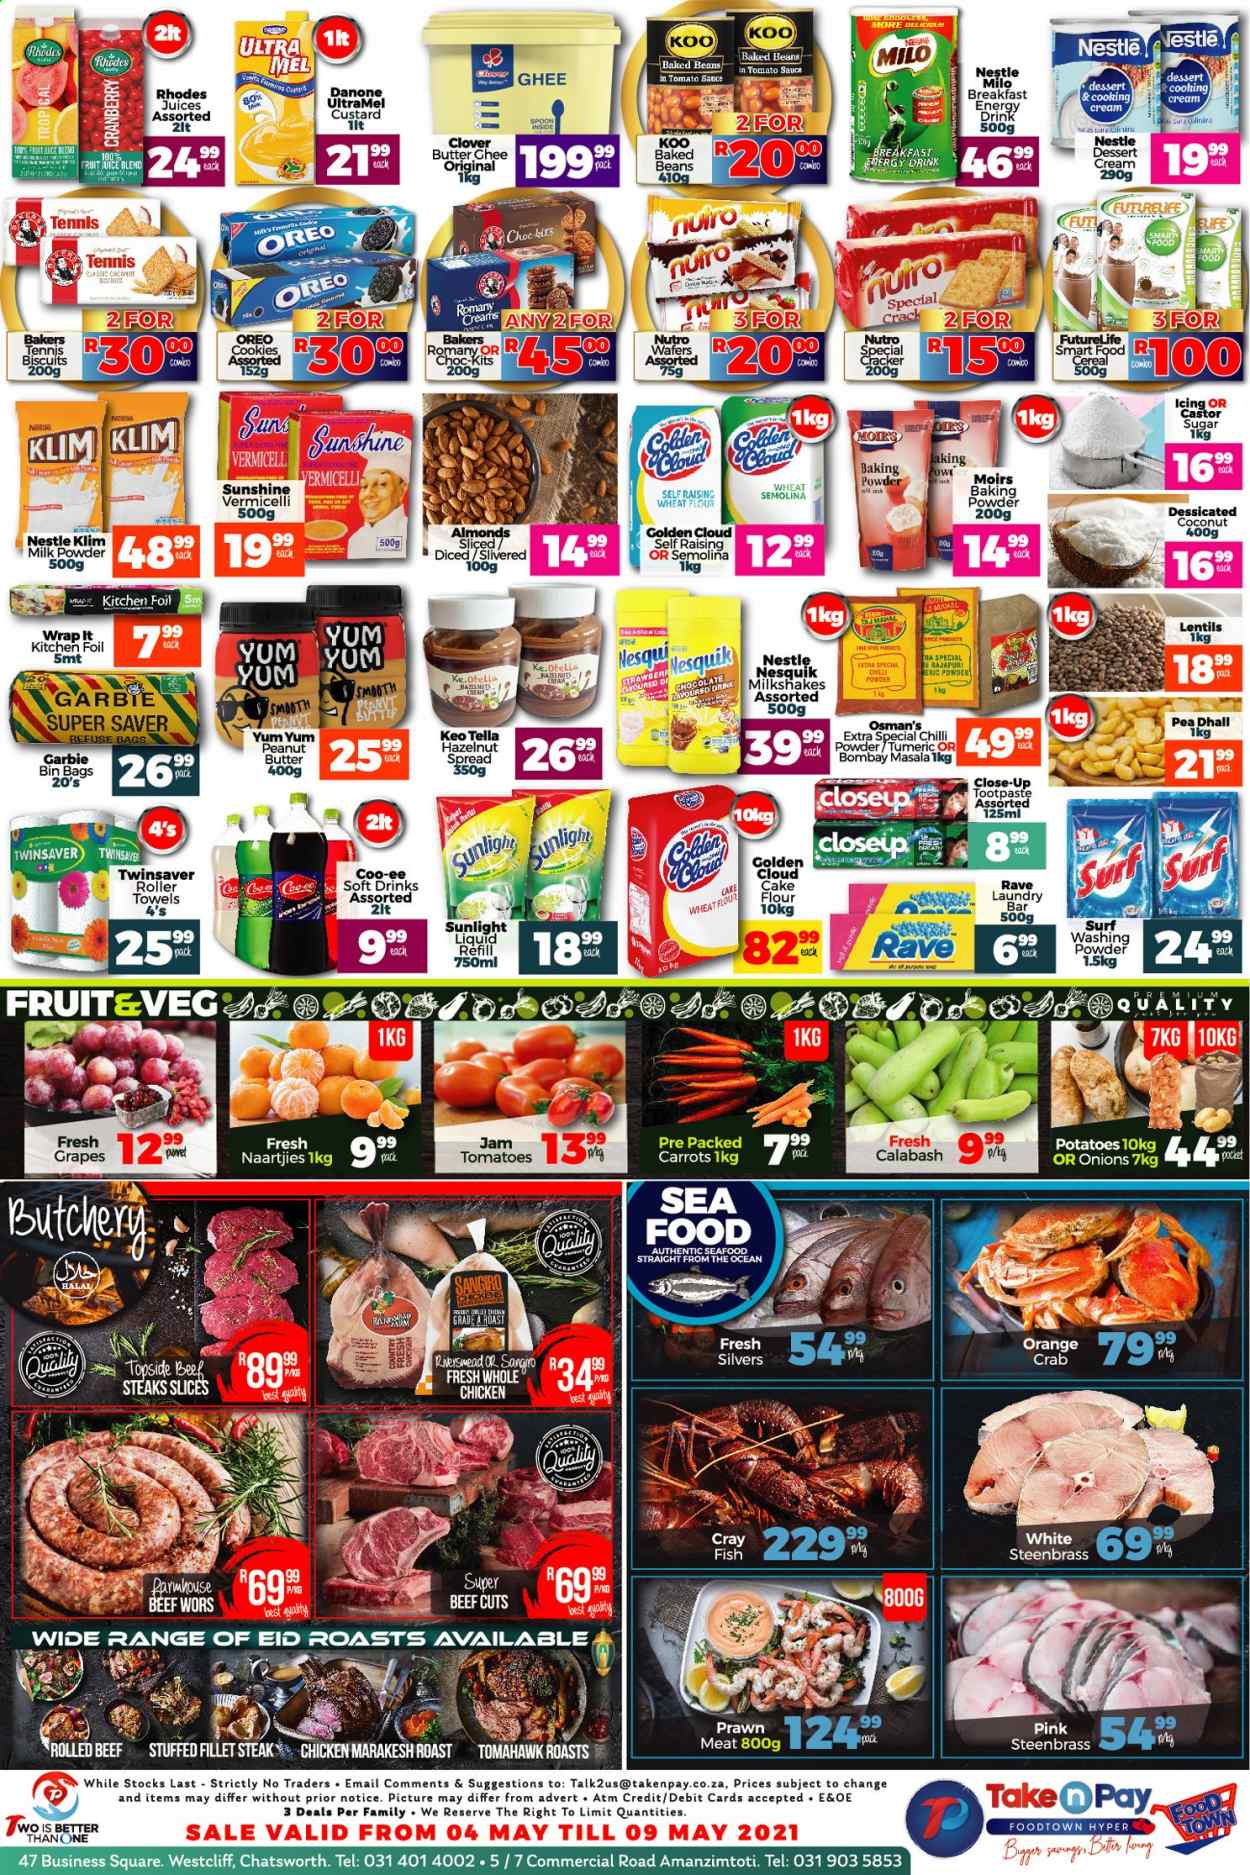 Take n Pay specials - 05.04.2021 - 05.09.2021. 